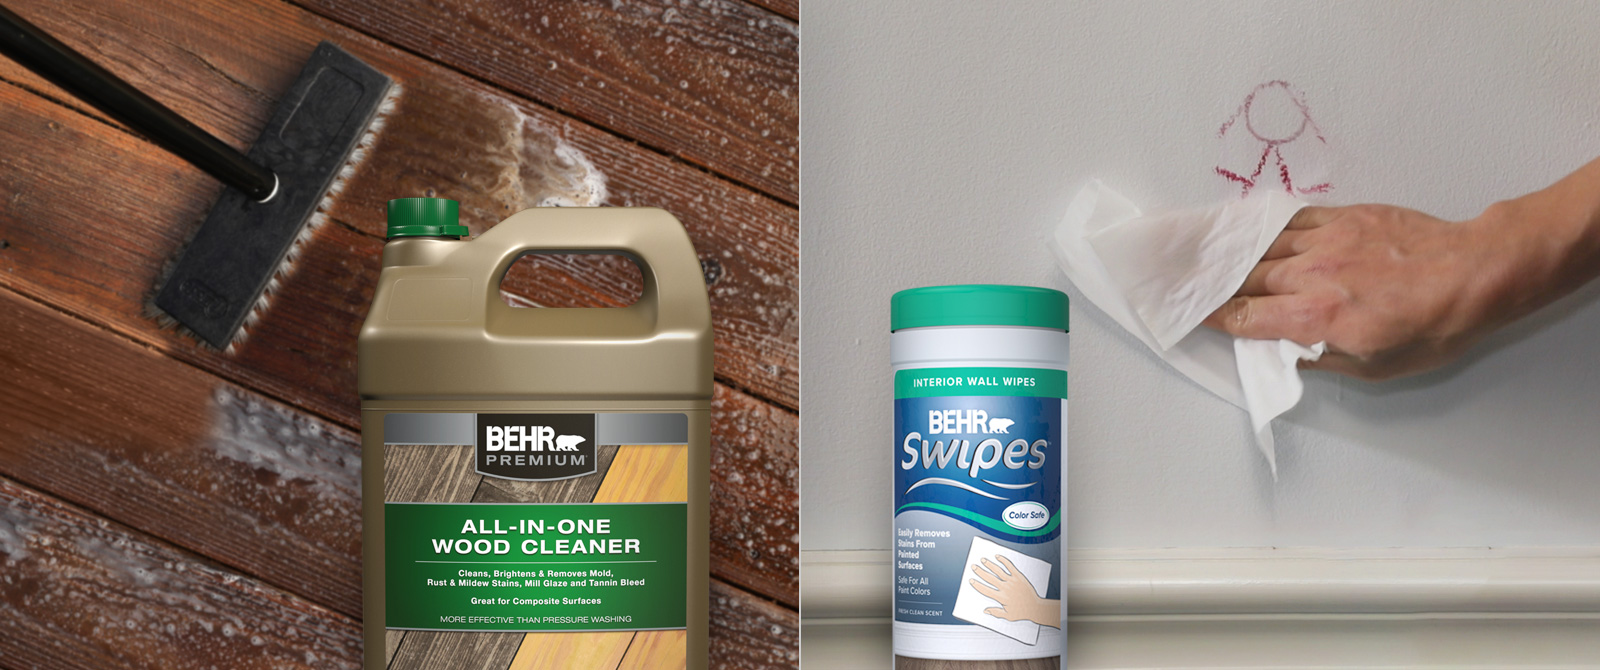 See all BEHR Cleaner products - BEHR Premium All-in-one Wood Cleaner and BEHR Swipes